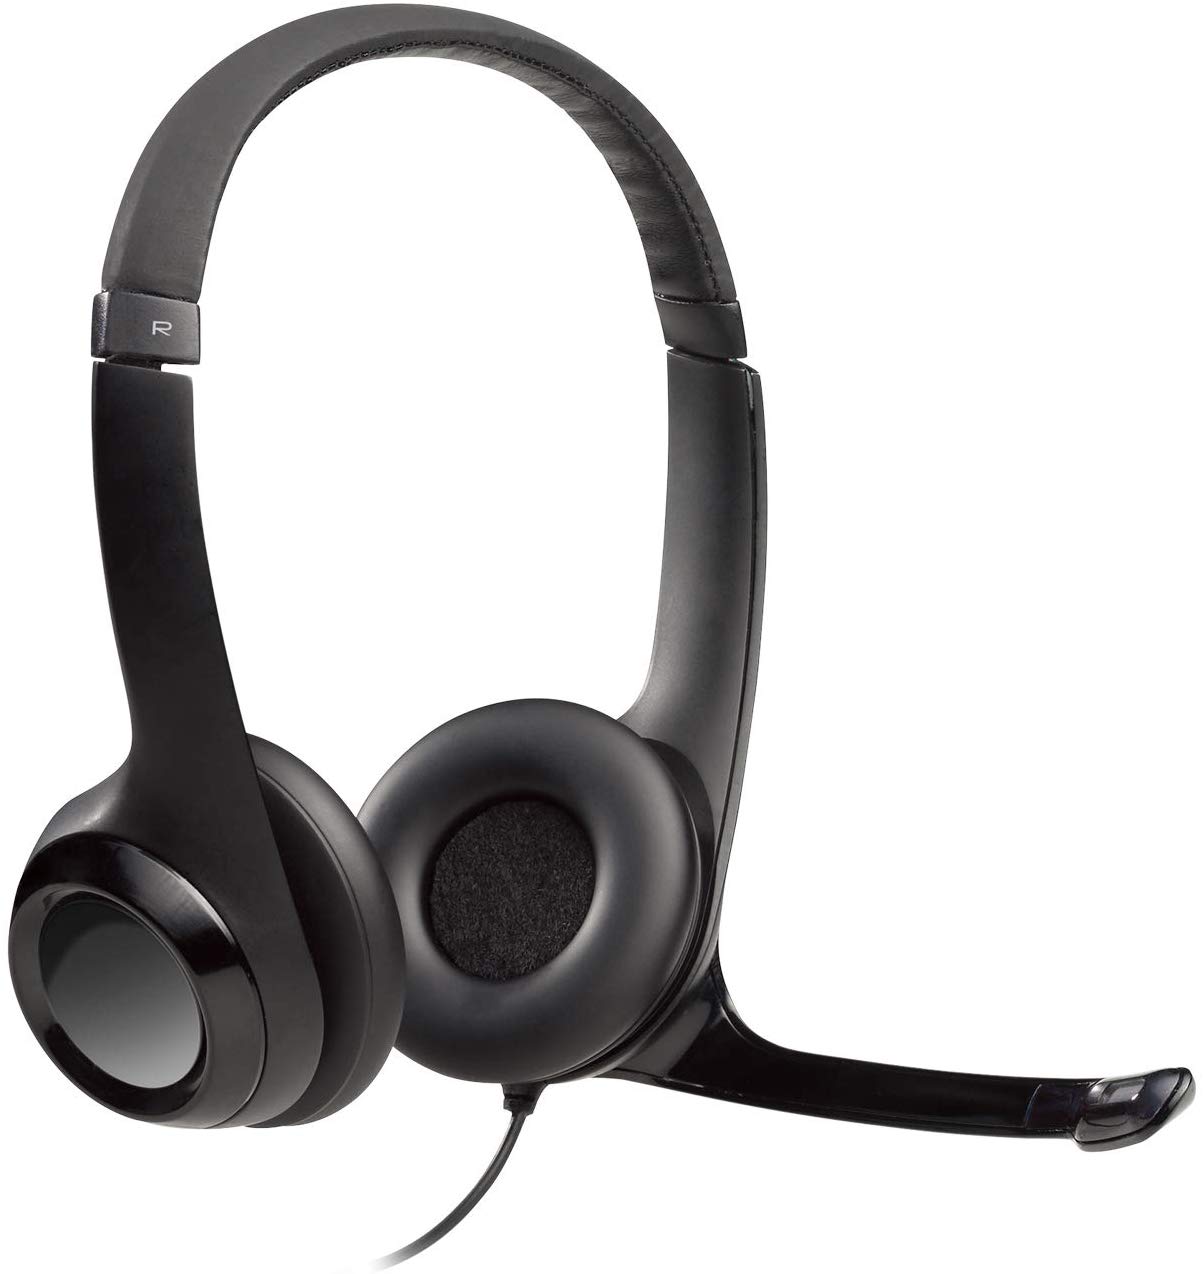 Logitech USB Headset H390 with Noise Cancelling Mic Bulk Package (Case of 20) - image 1 of 3